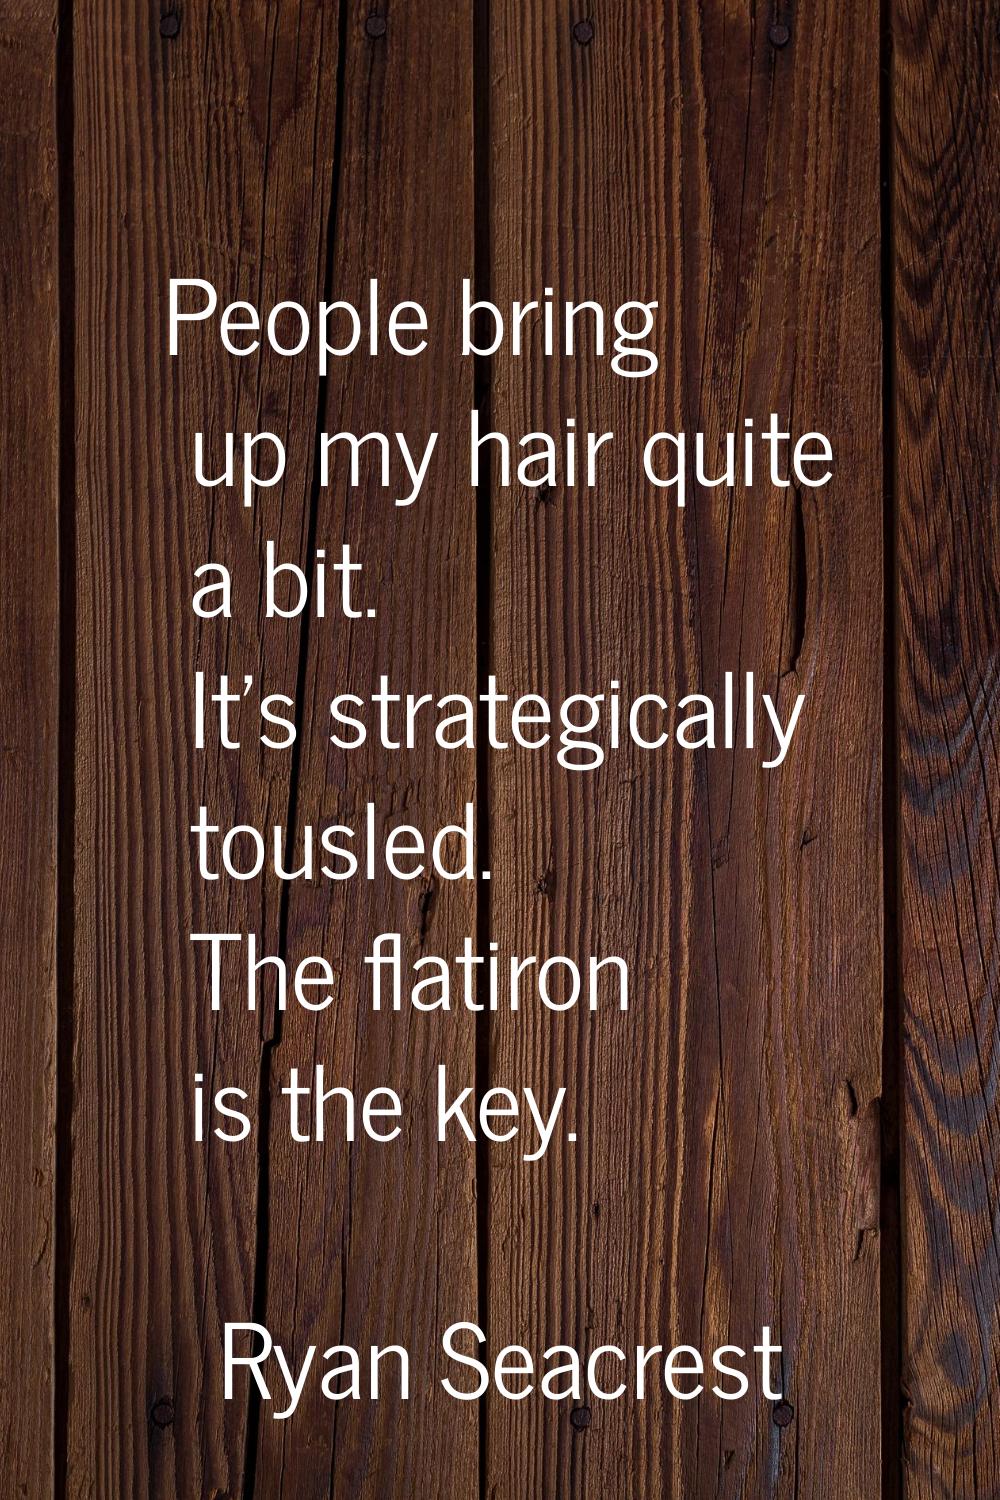 People bring up my hair quite a bit. It's strategically tousled. The flatiron is the key.